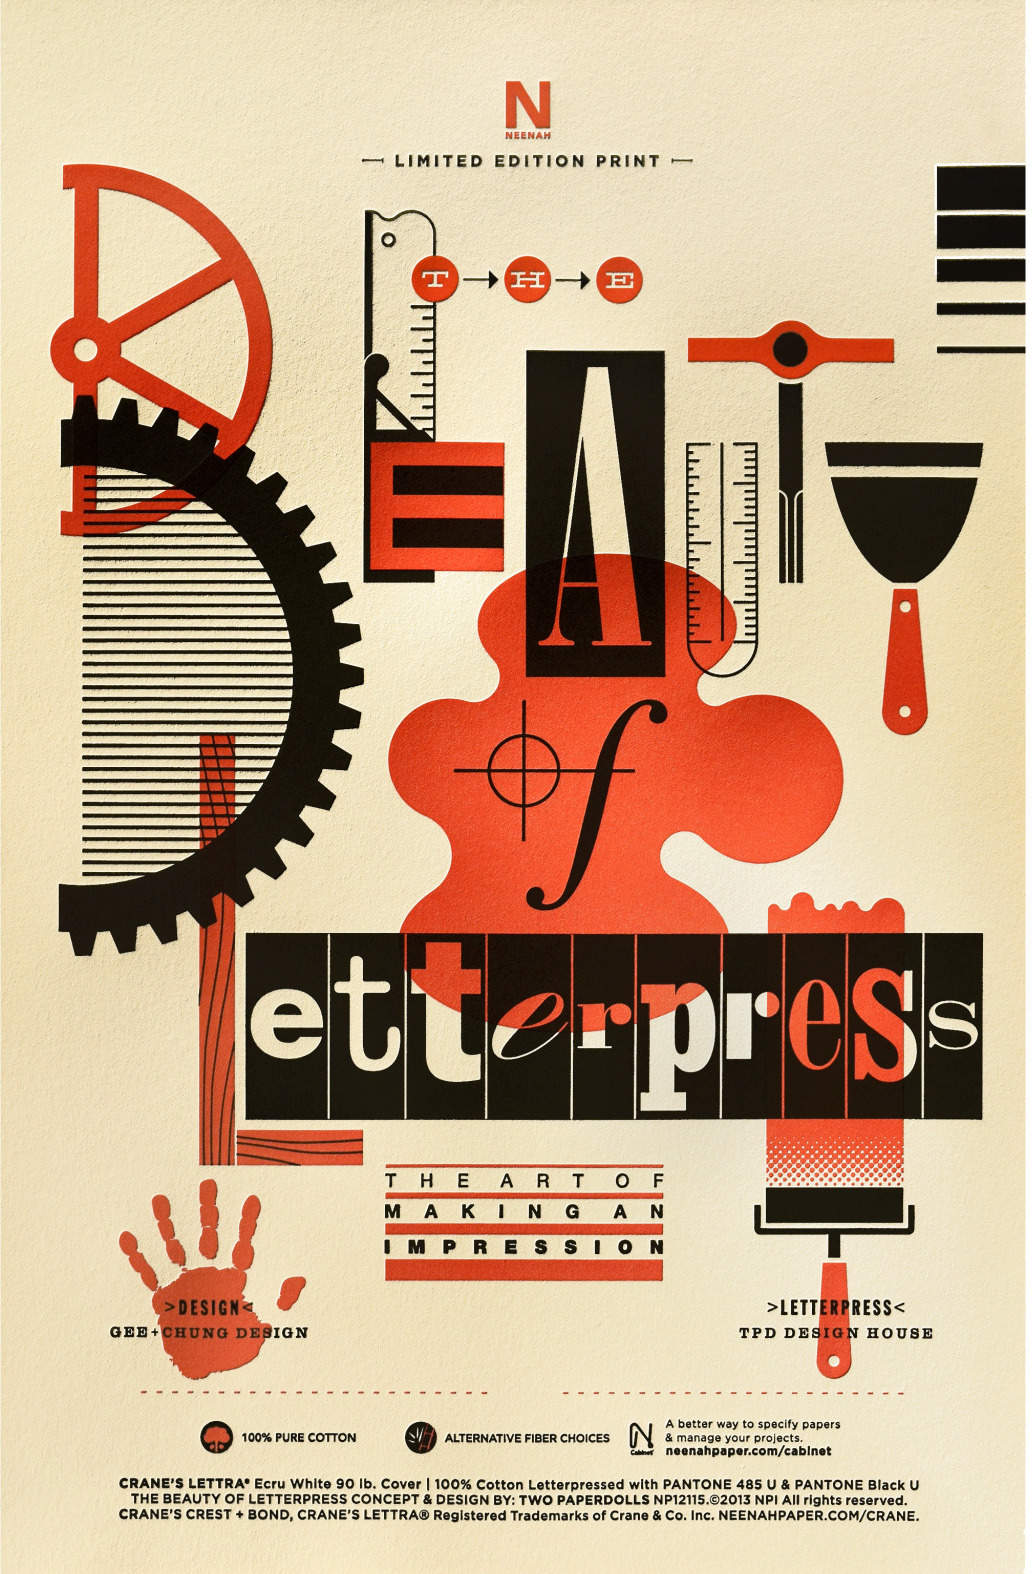 Edition #13 of “The Beauty of Letterpress: The Art of Making an Impression”, Earl Gee2006 (background; image via Type Worship)